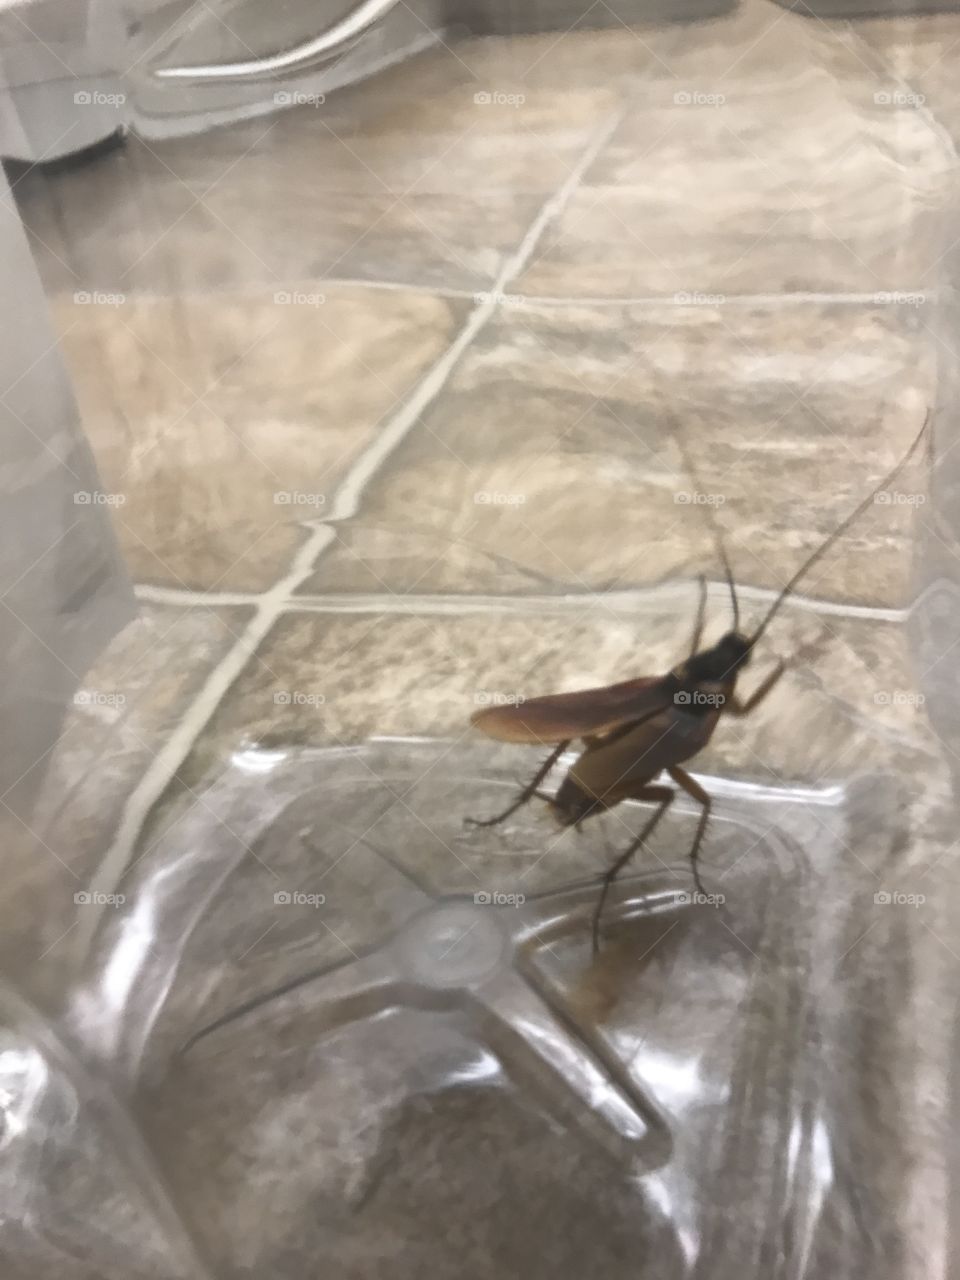 Cockroach with wings expanded